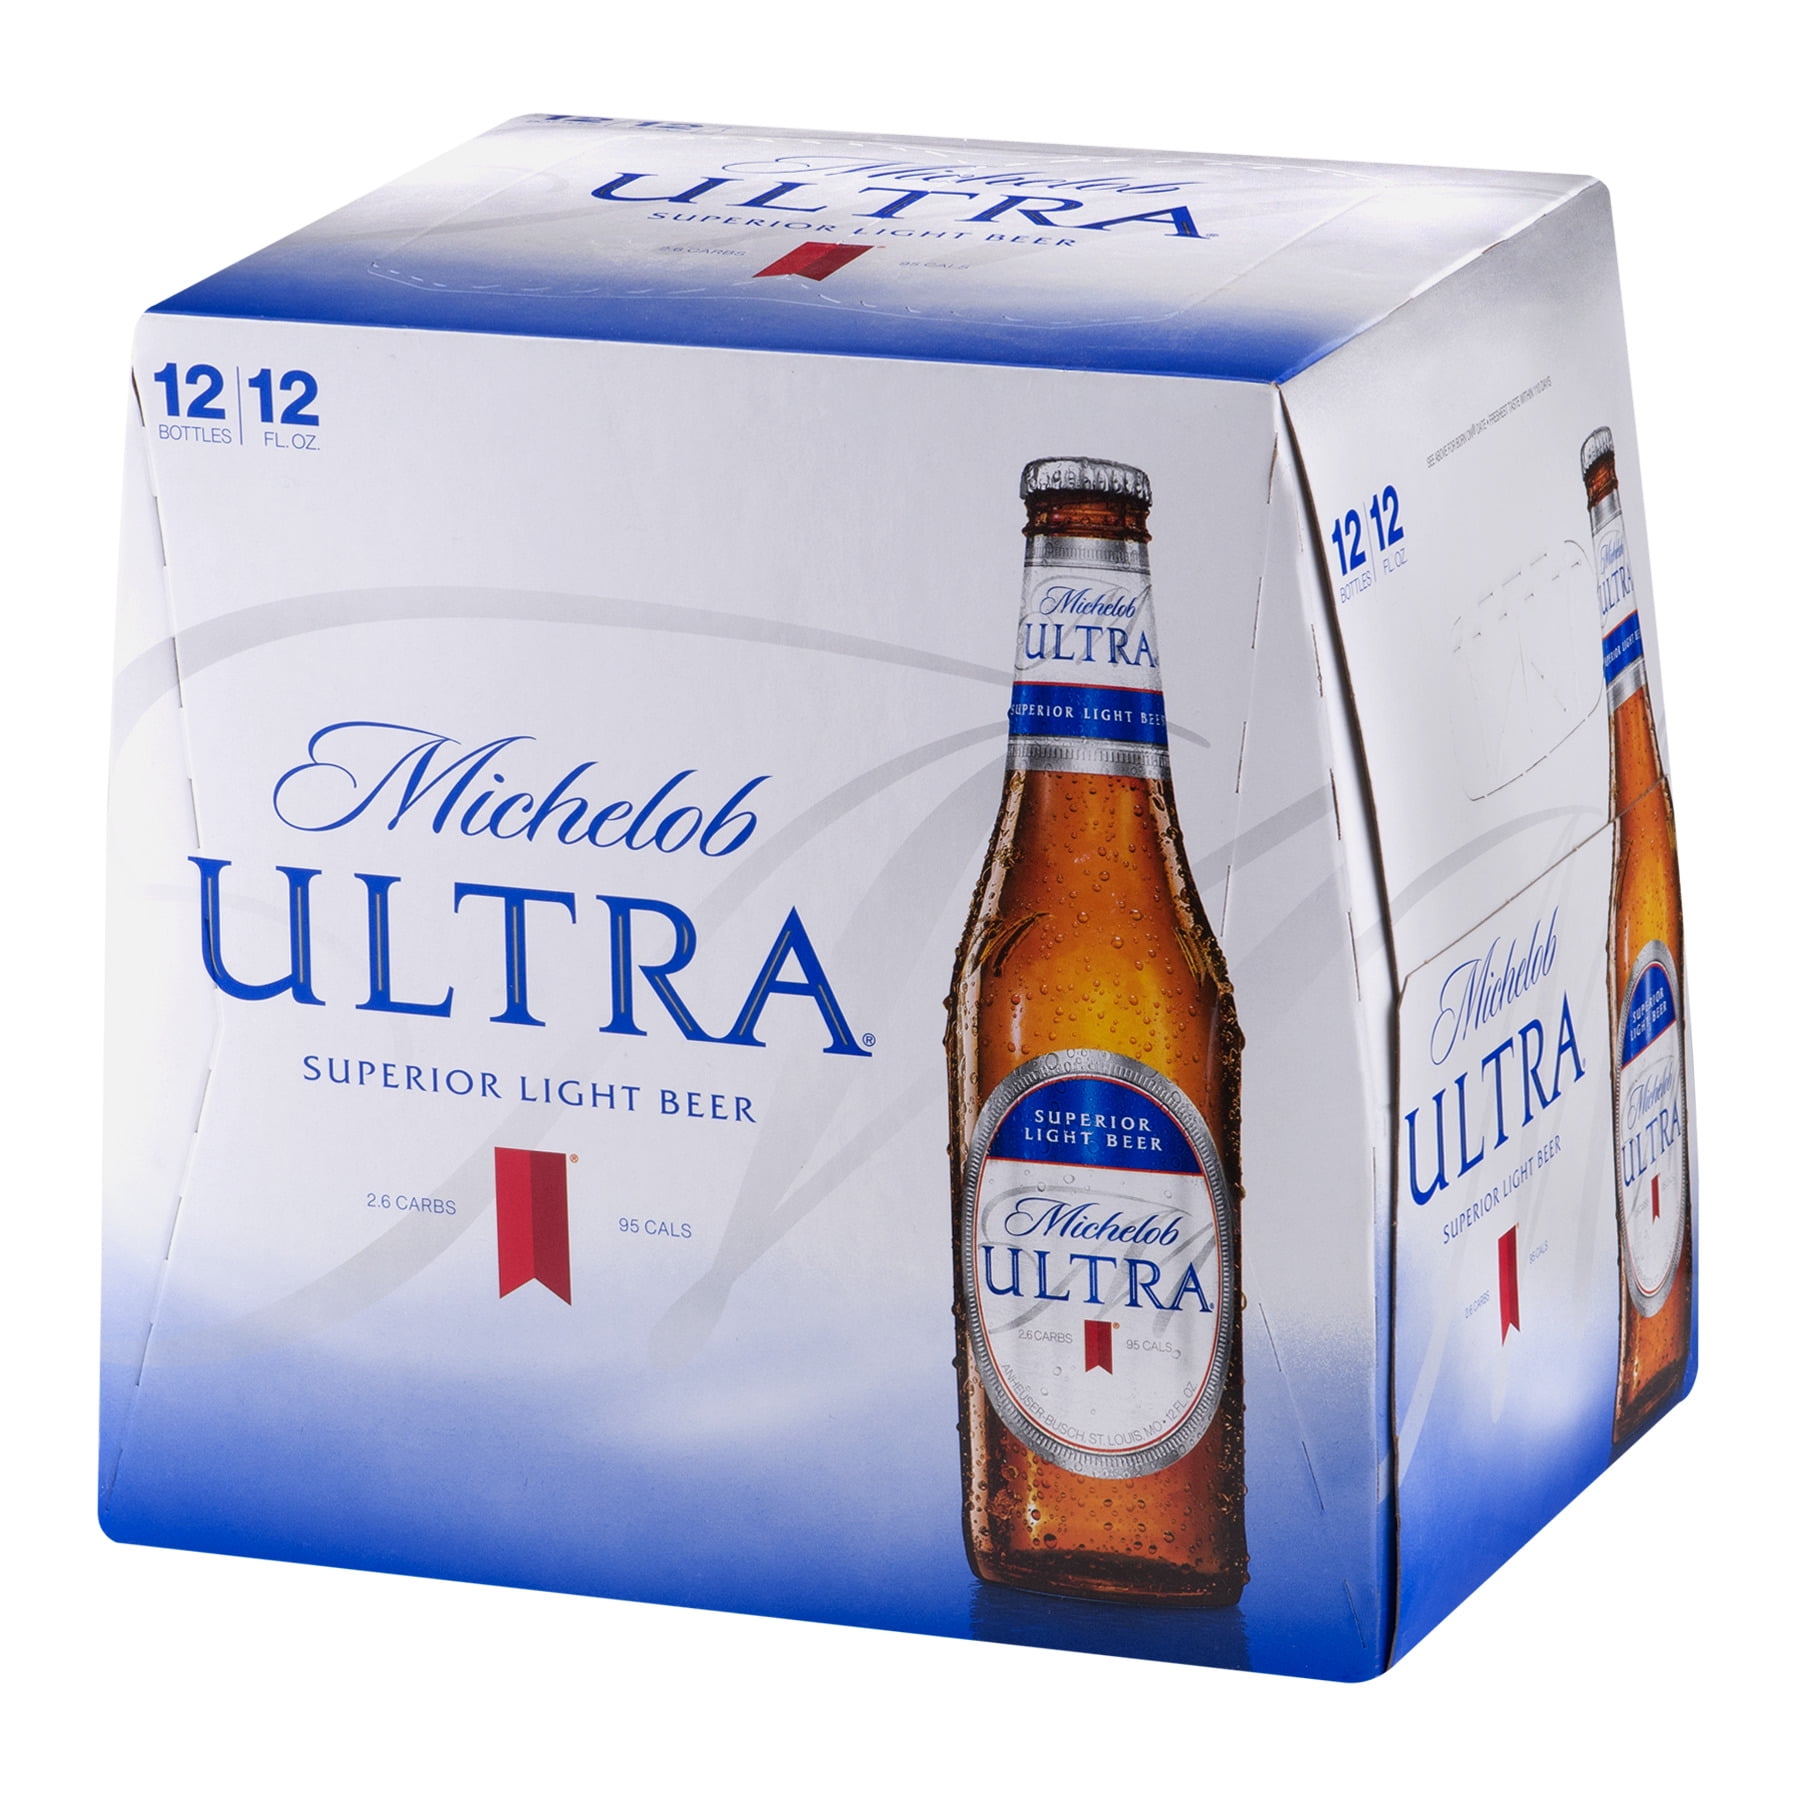 Michelob Ultra Superior Light Beer Alcohol Content.